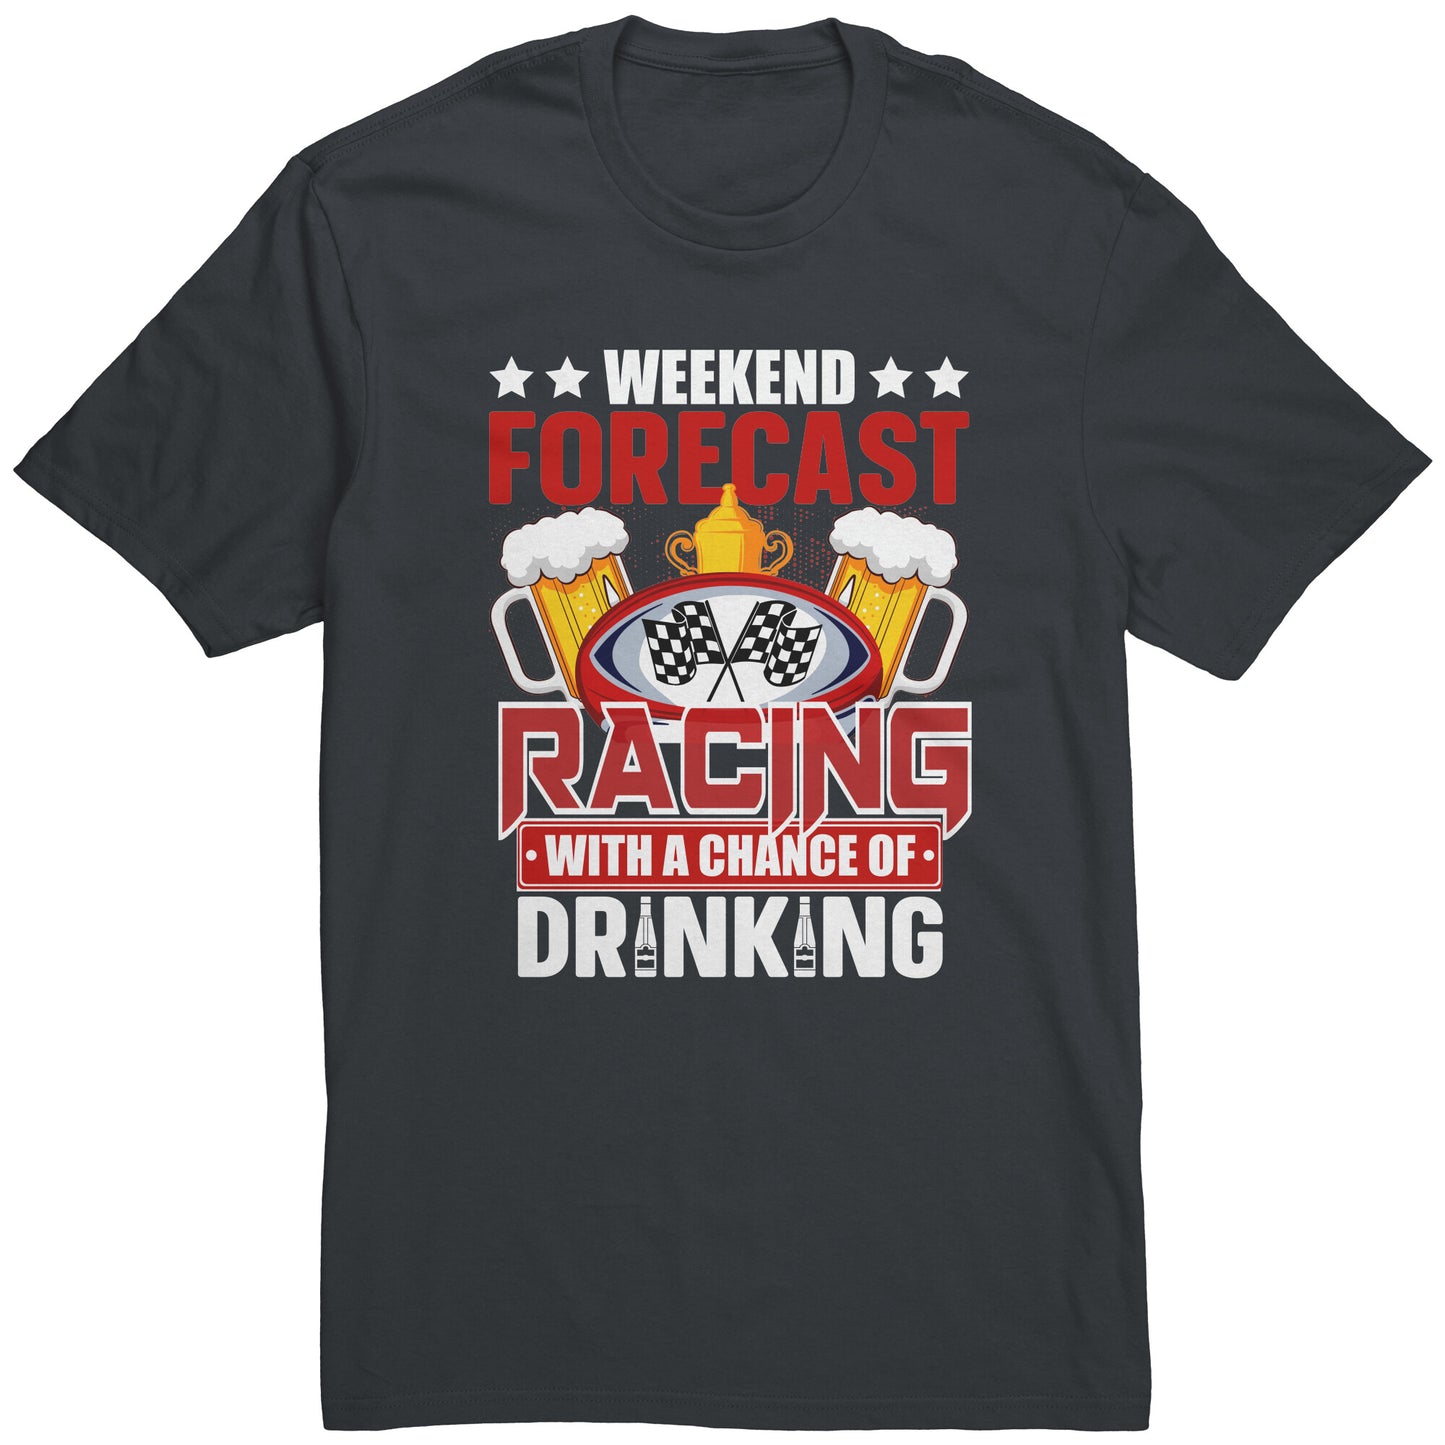 Weekend Forecast Racing With A Chance Of Drinking Men's T-Shirt